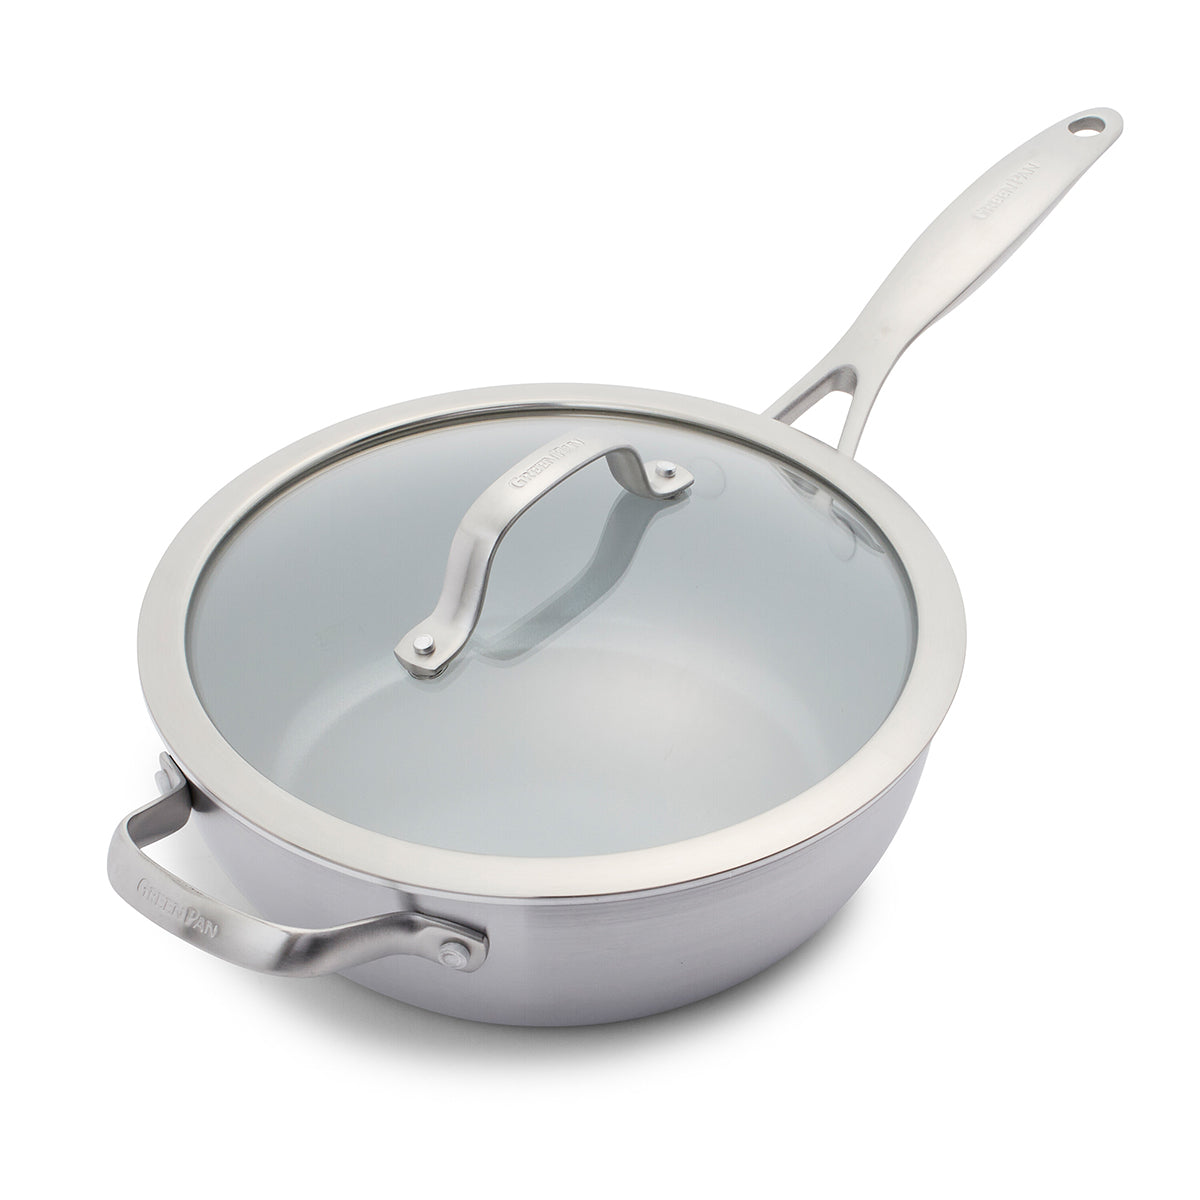 Choice 6 1/2 x 3 1/2 Gray Silicone Coated Cotton Pot / Pan Handle Cover